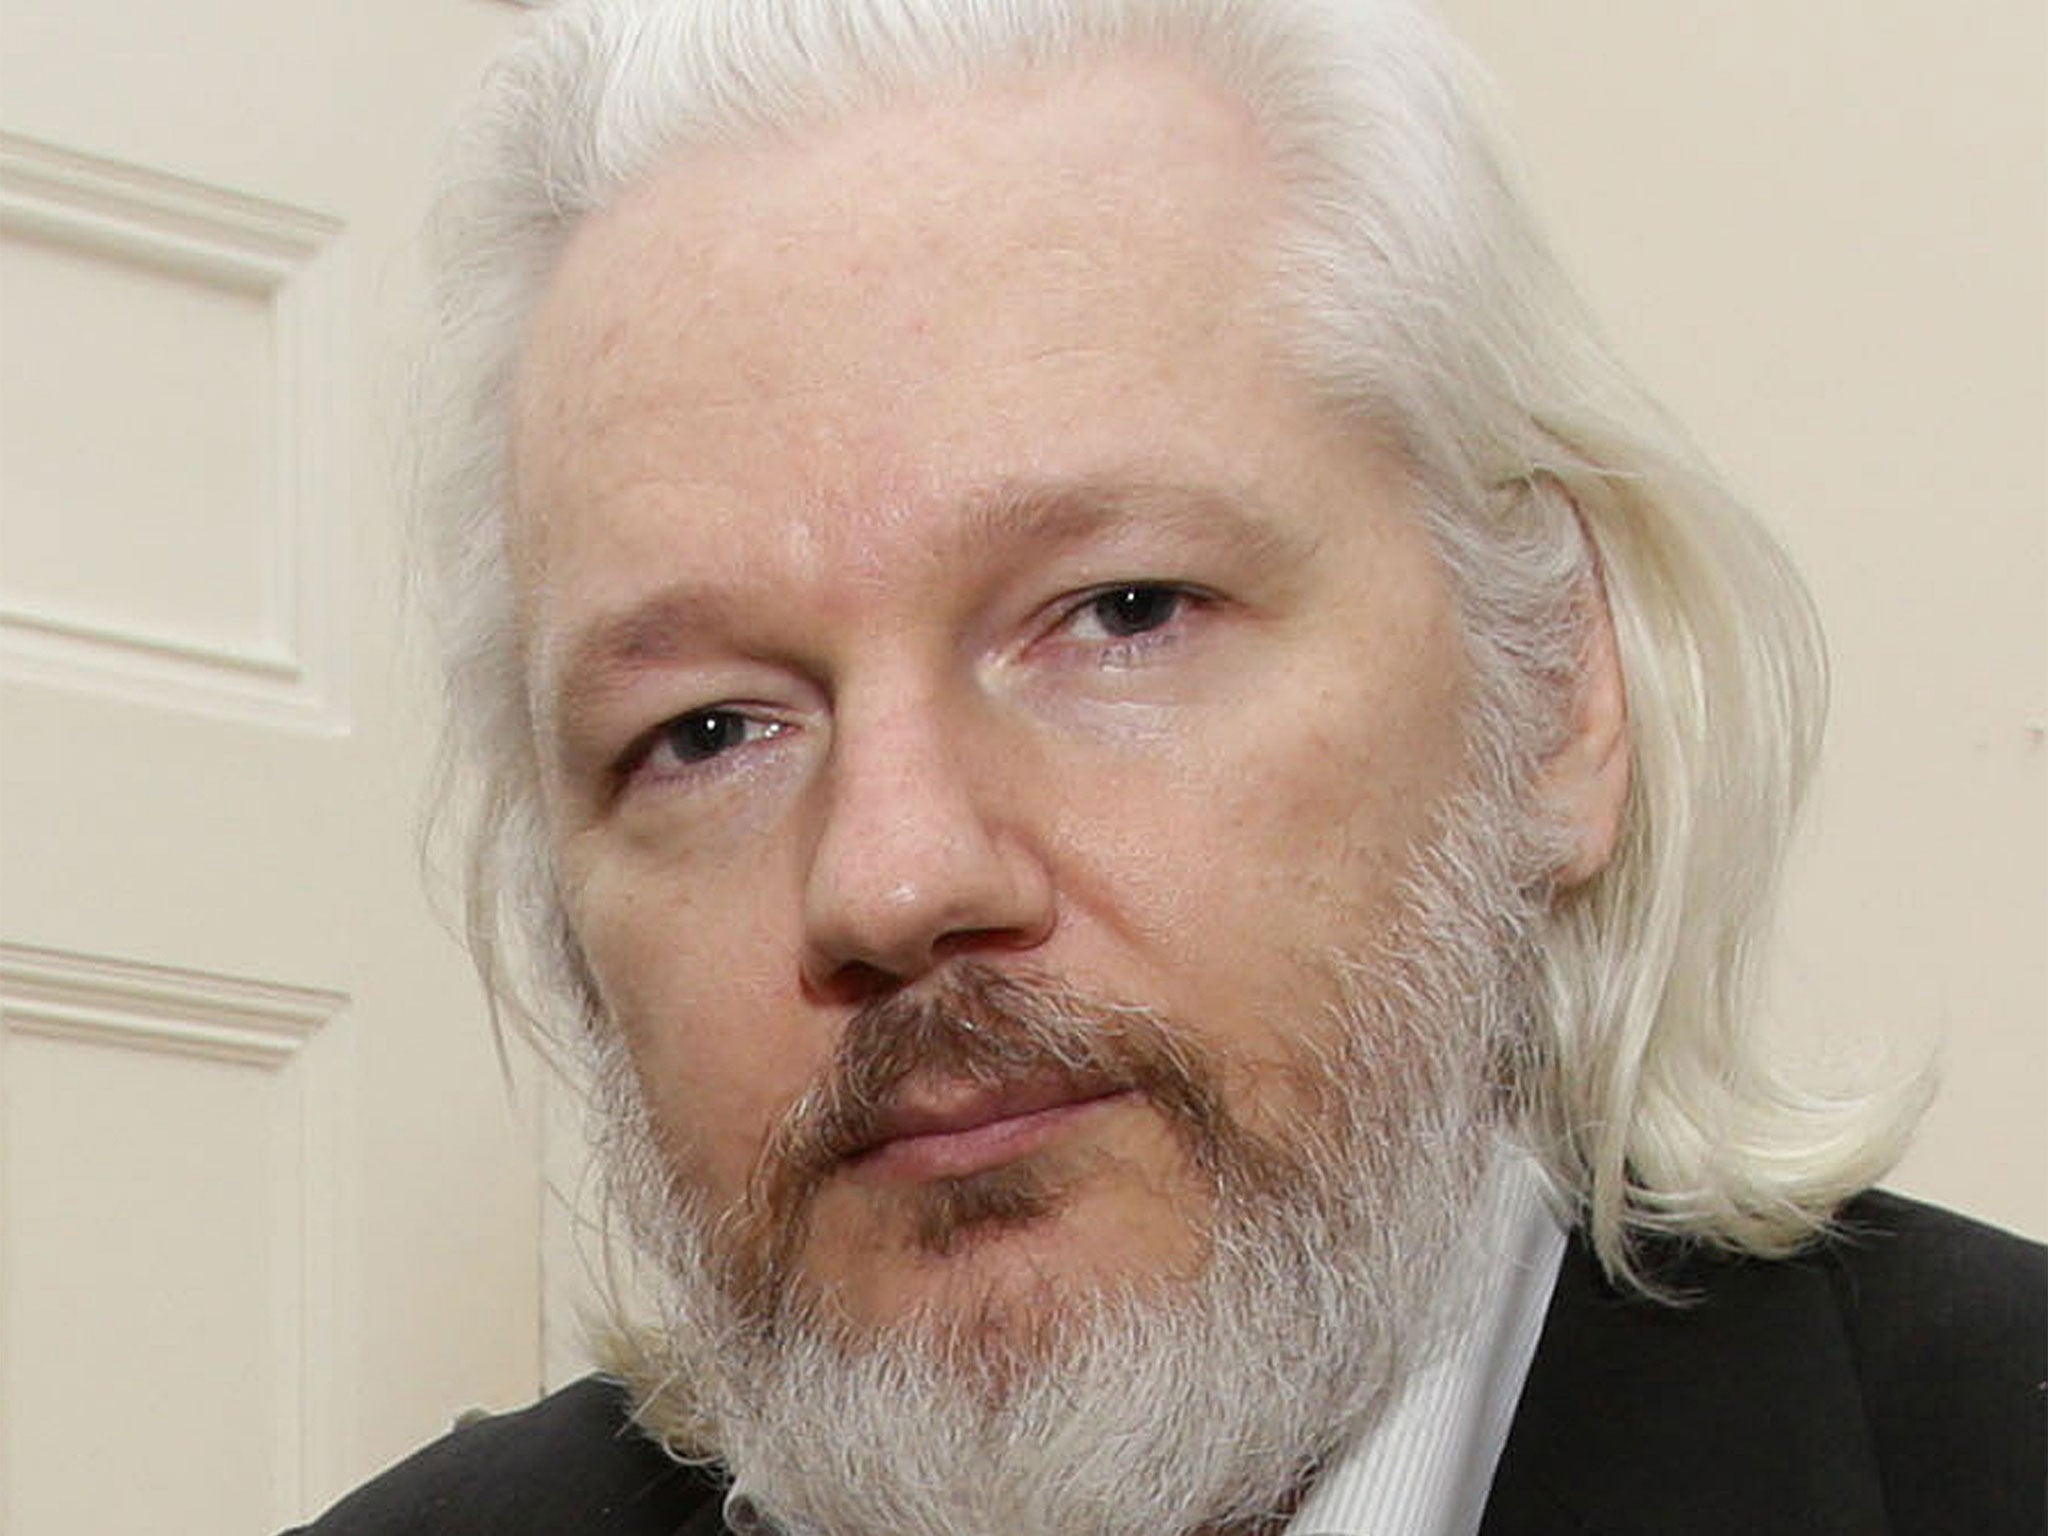 Julian Assange has been living in the embassy for more than three years